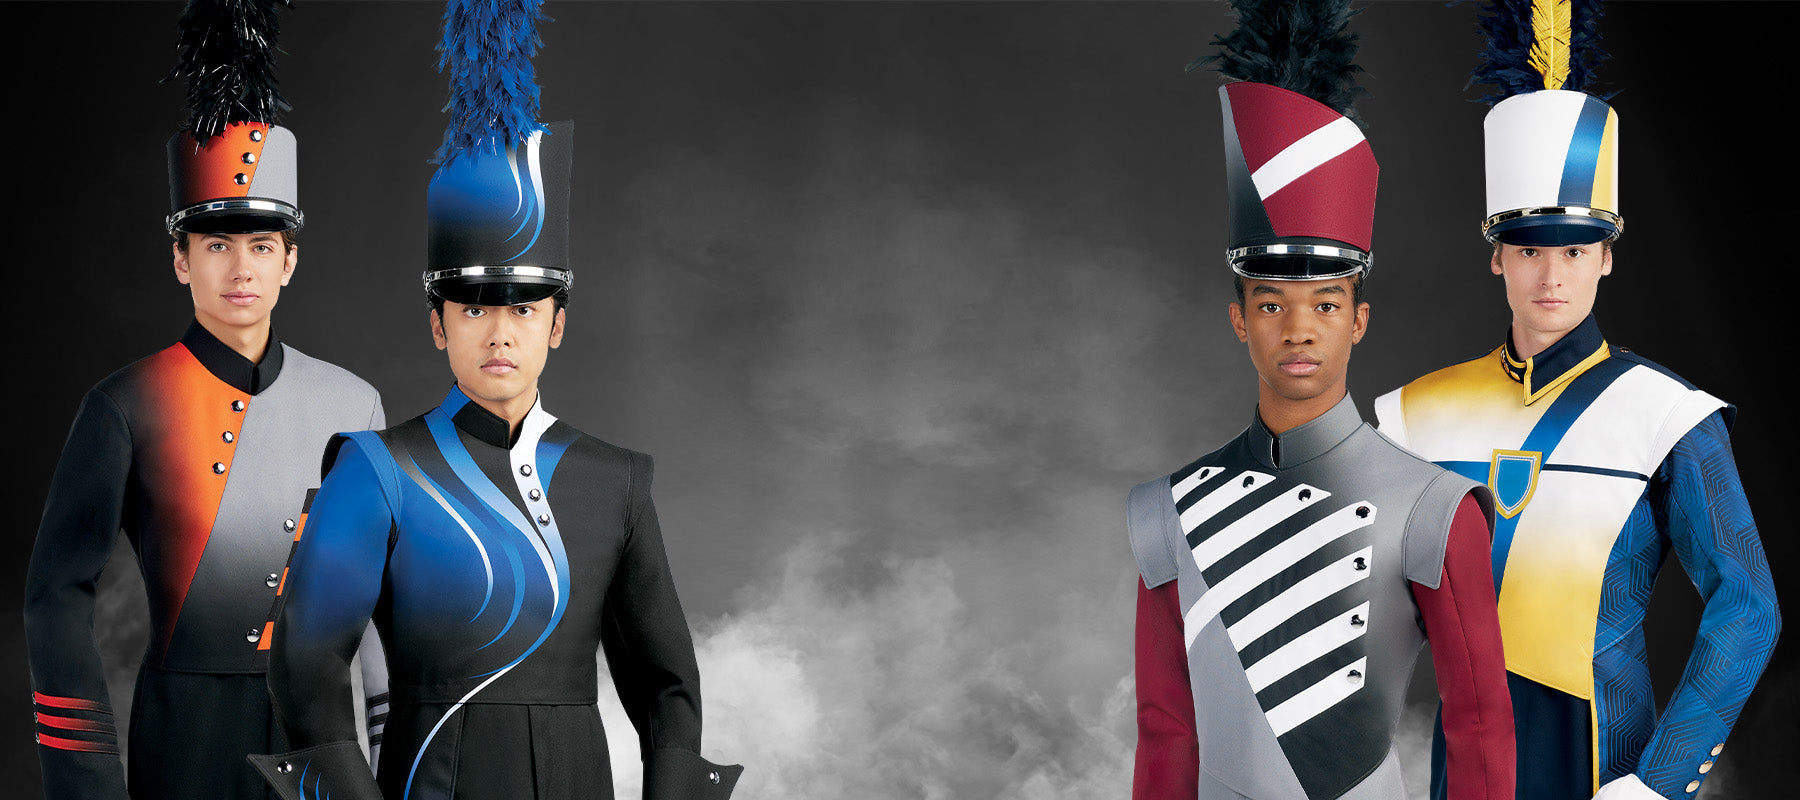 Marching Band: Plumes – DeMoulin Bros. and Co.